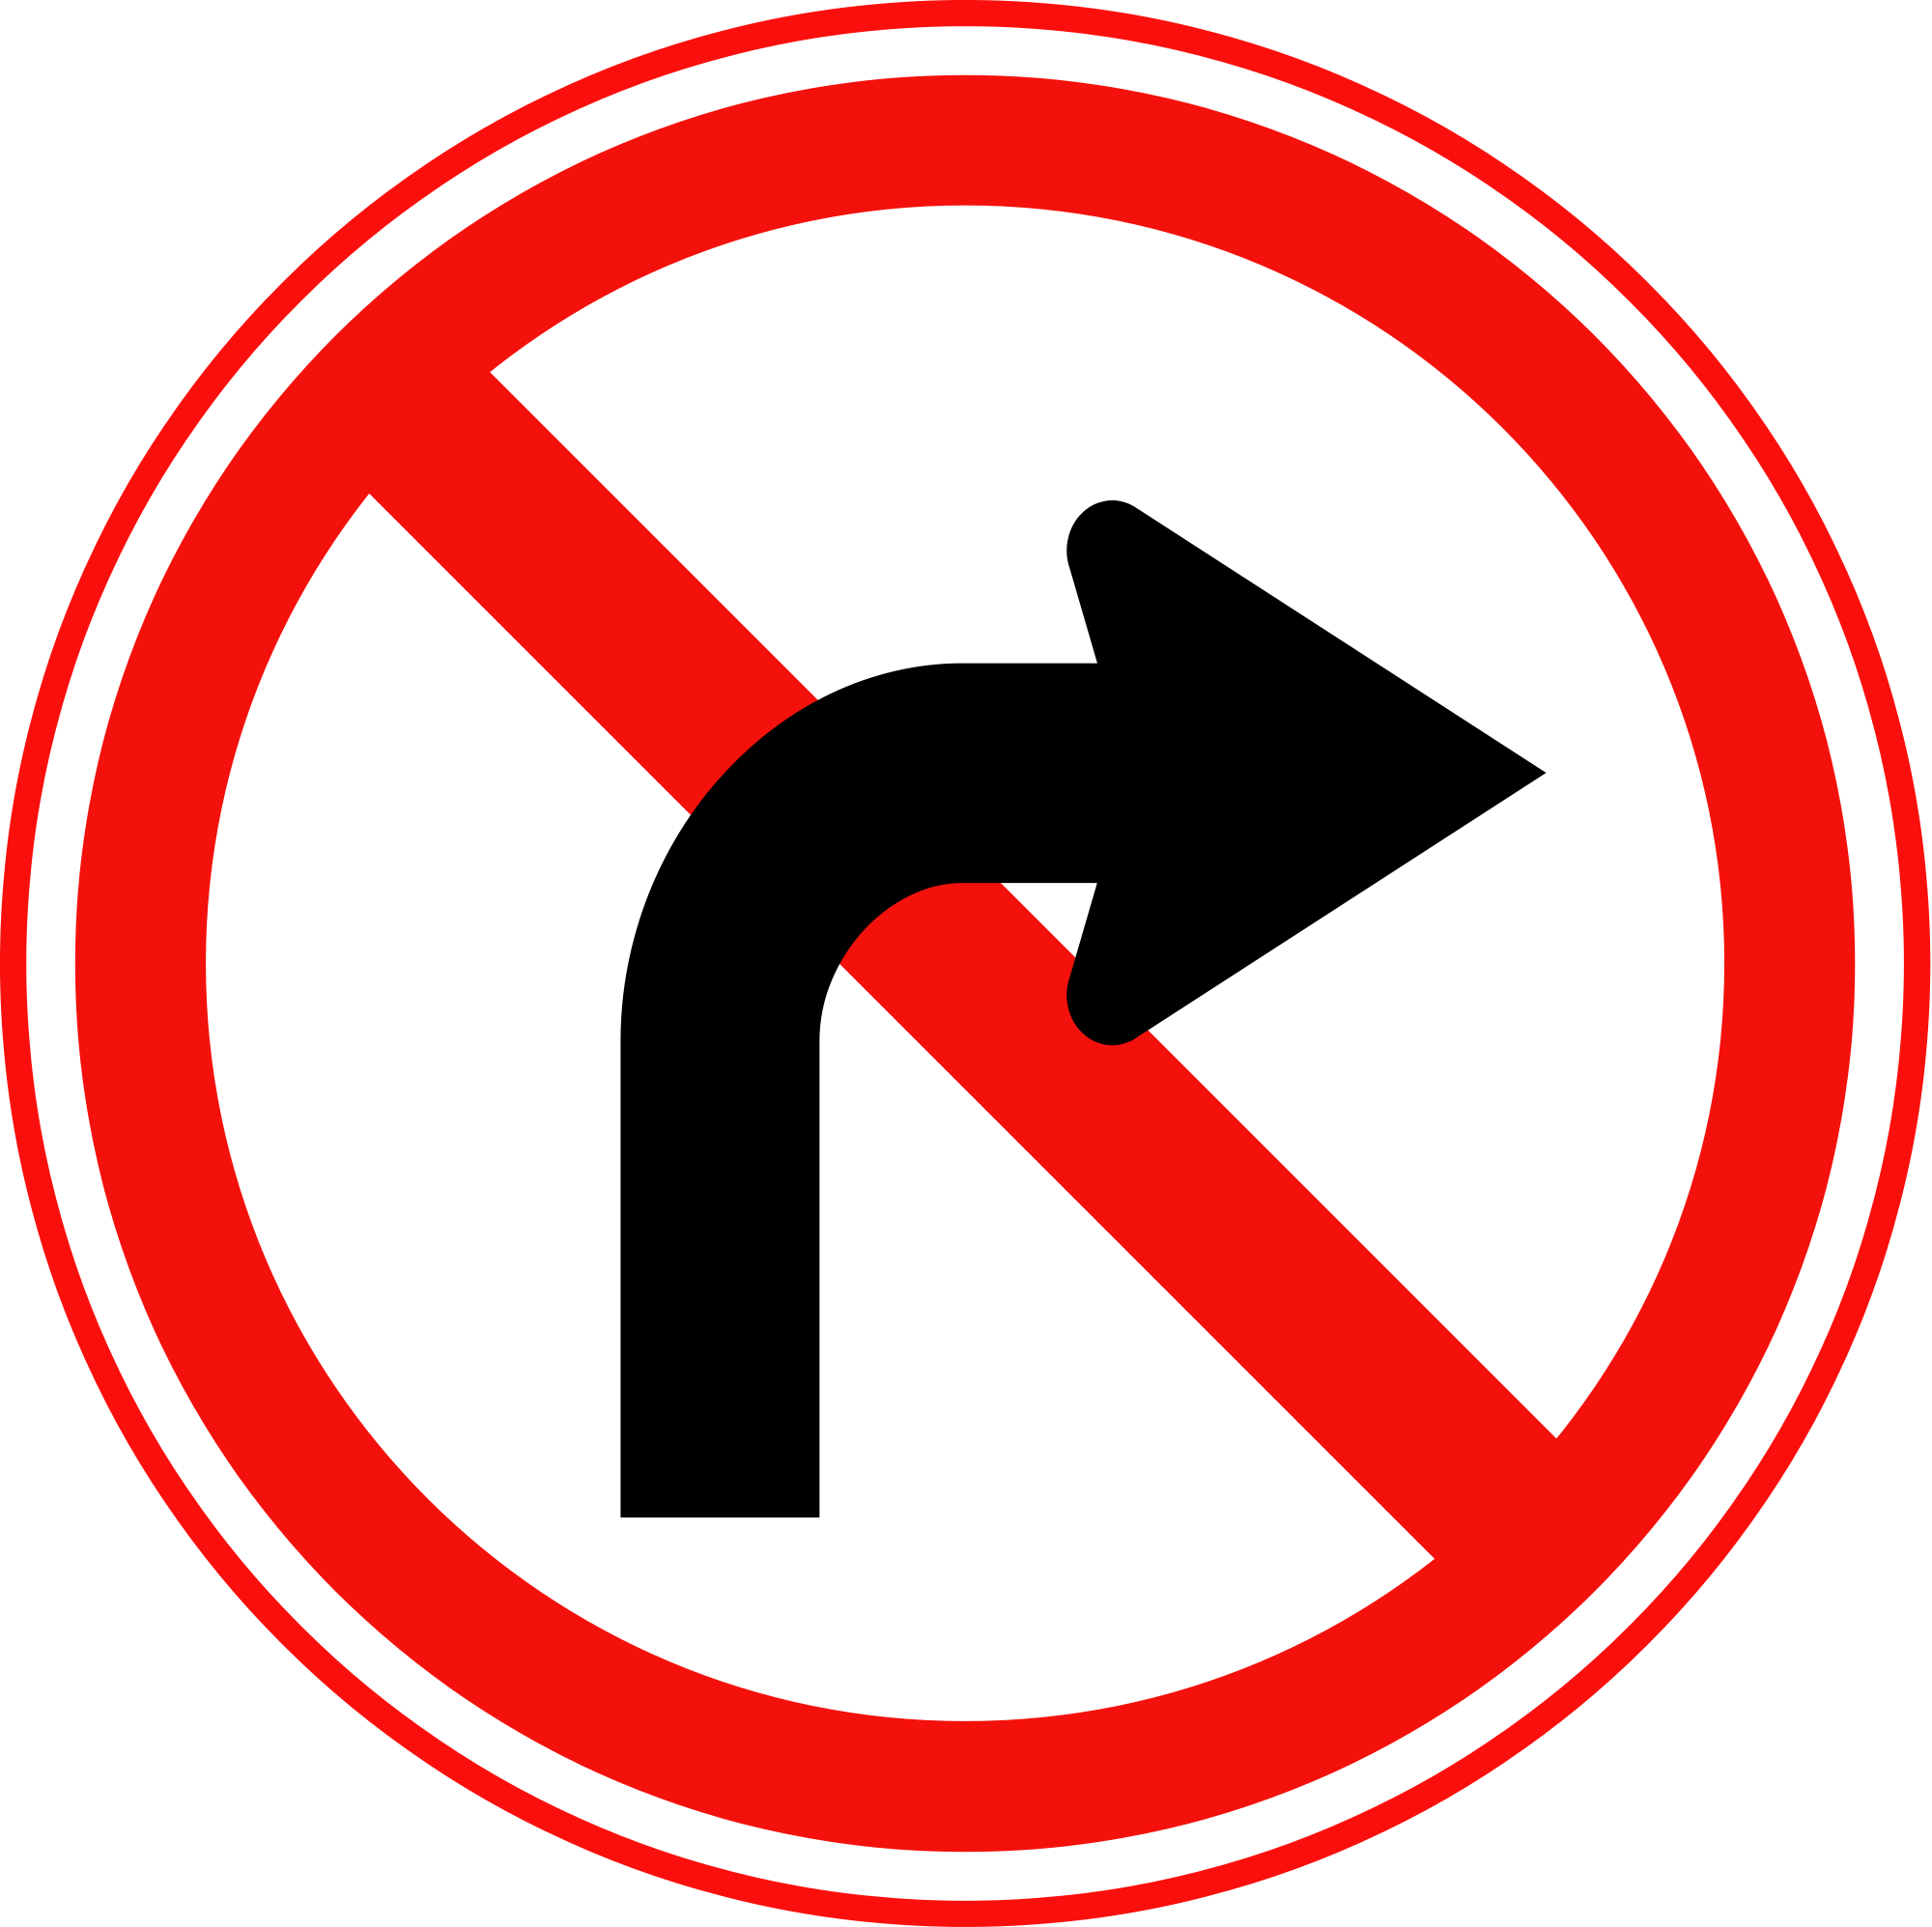 Open - No Right Turn Traffic Sign (2000x1995)